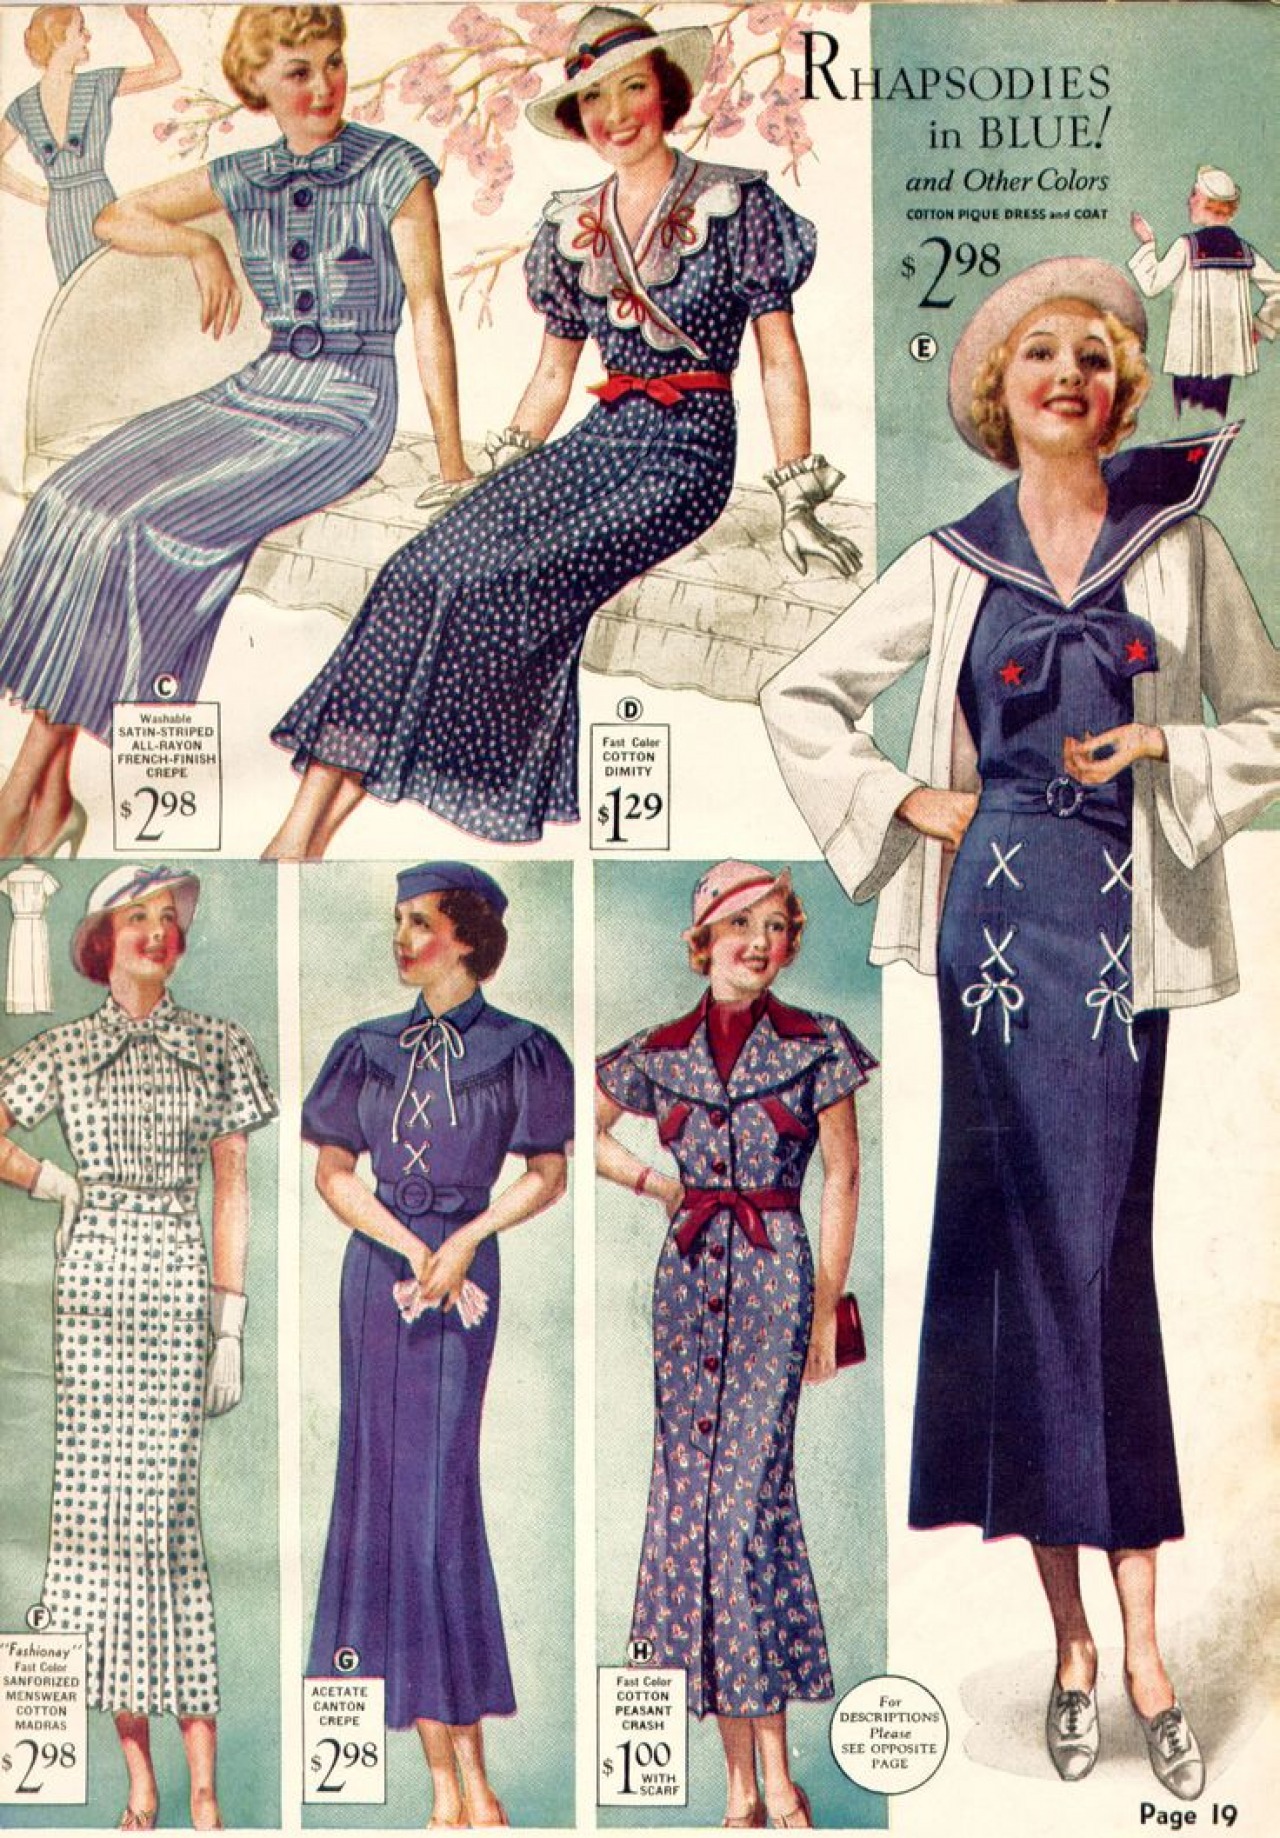 Womens fashion from the 1920s by designer Augusta Bernard